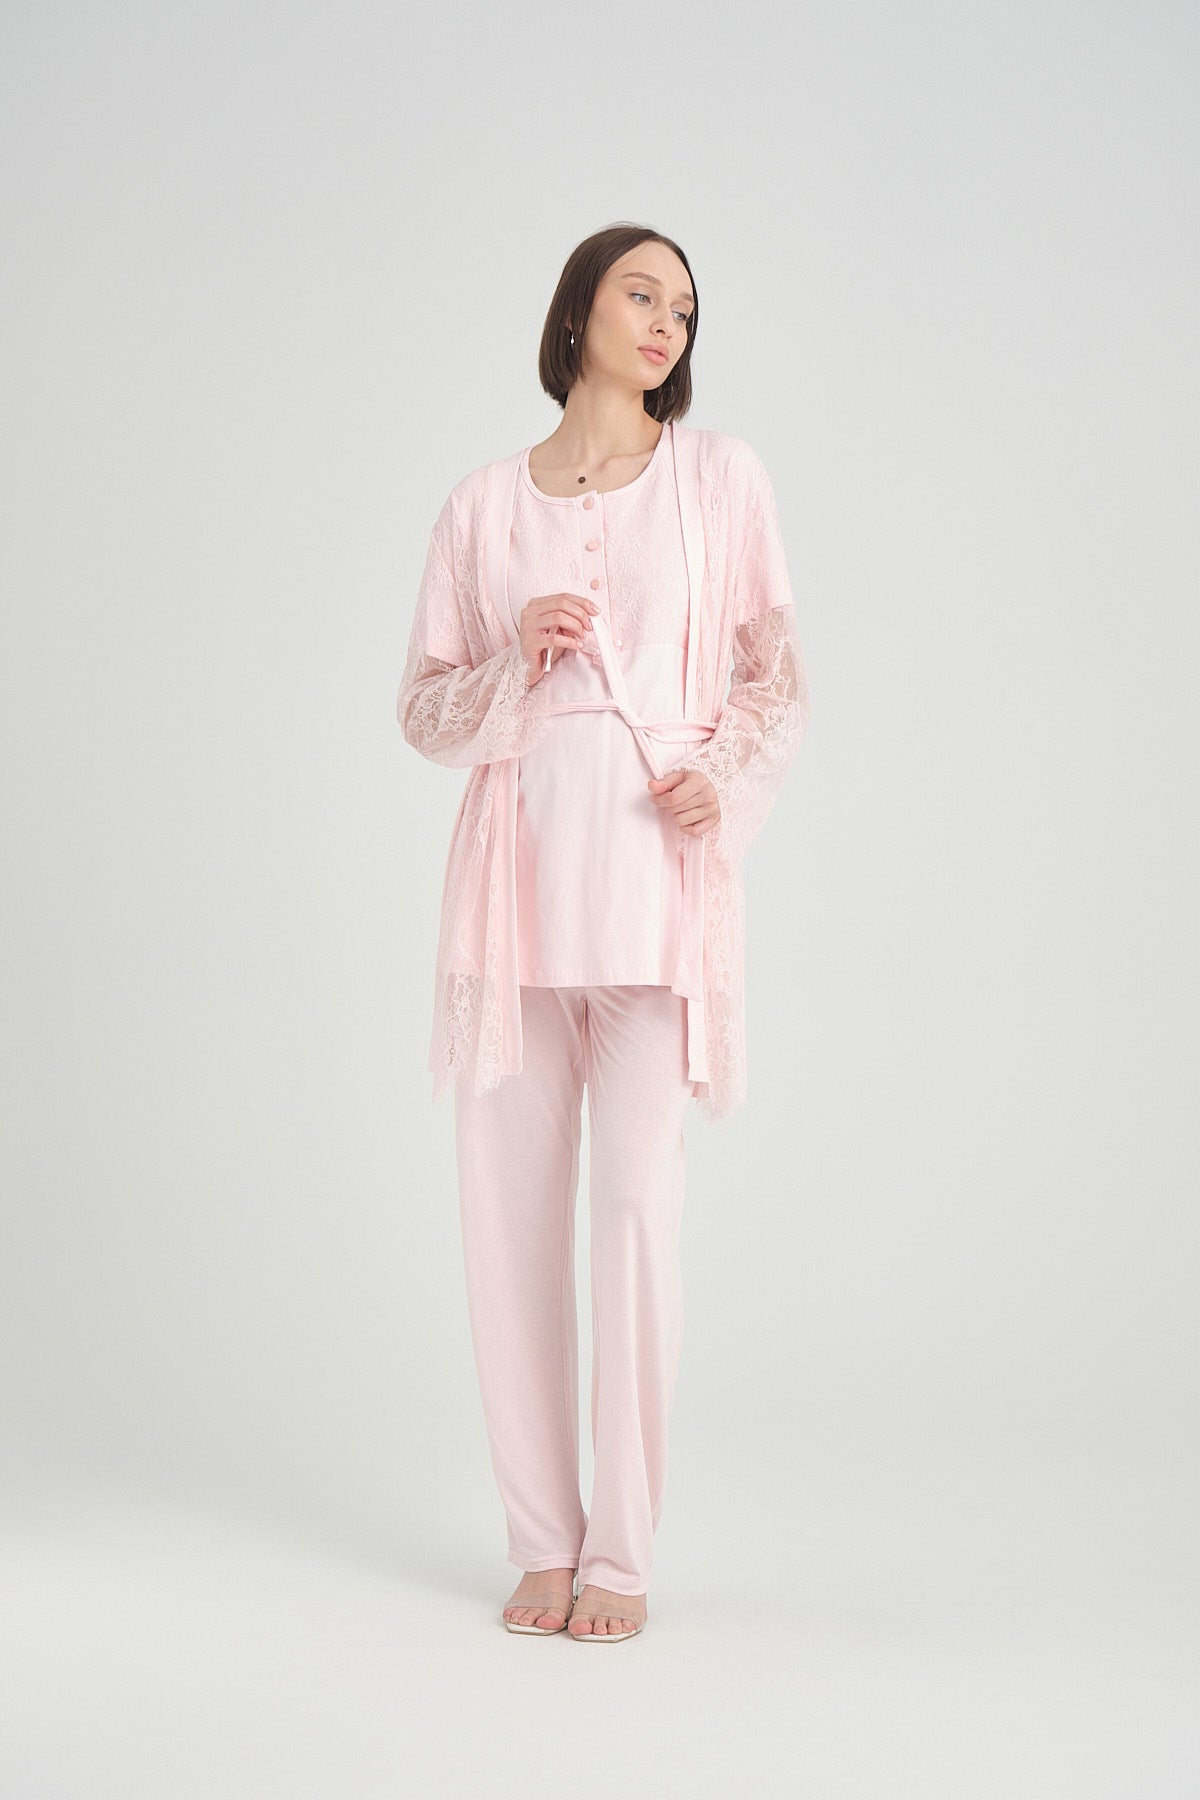 Shopymommy 2370 Lace Detailed 3-Pieces Maternity & Nursing Pajamas With Robe Pink